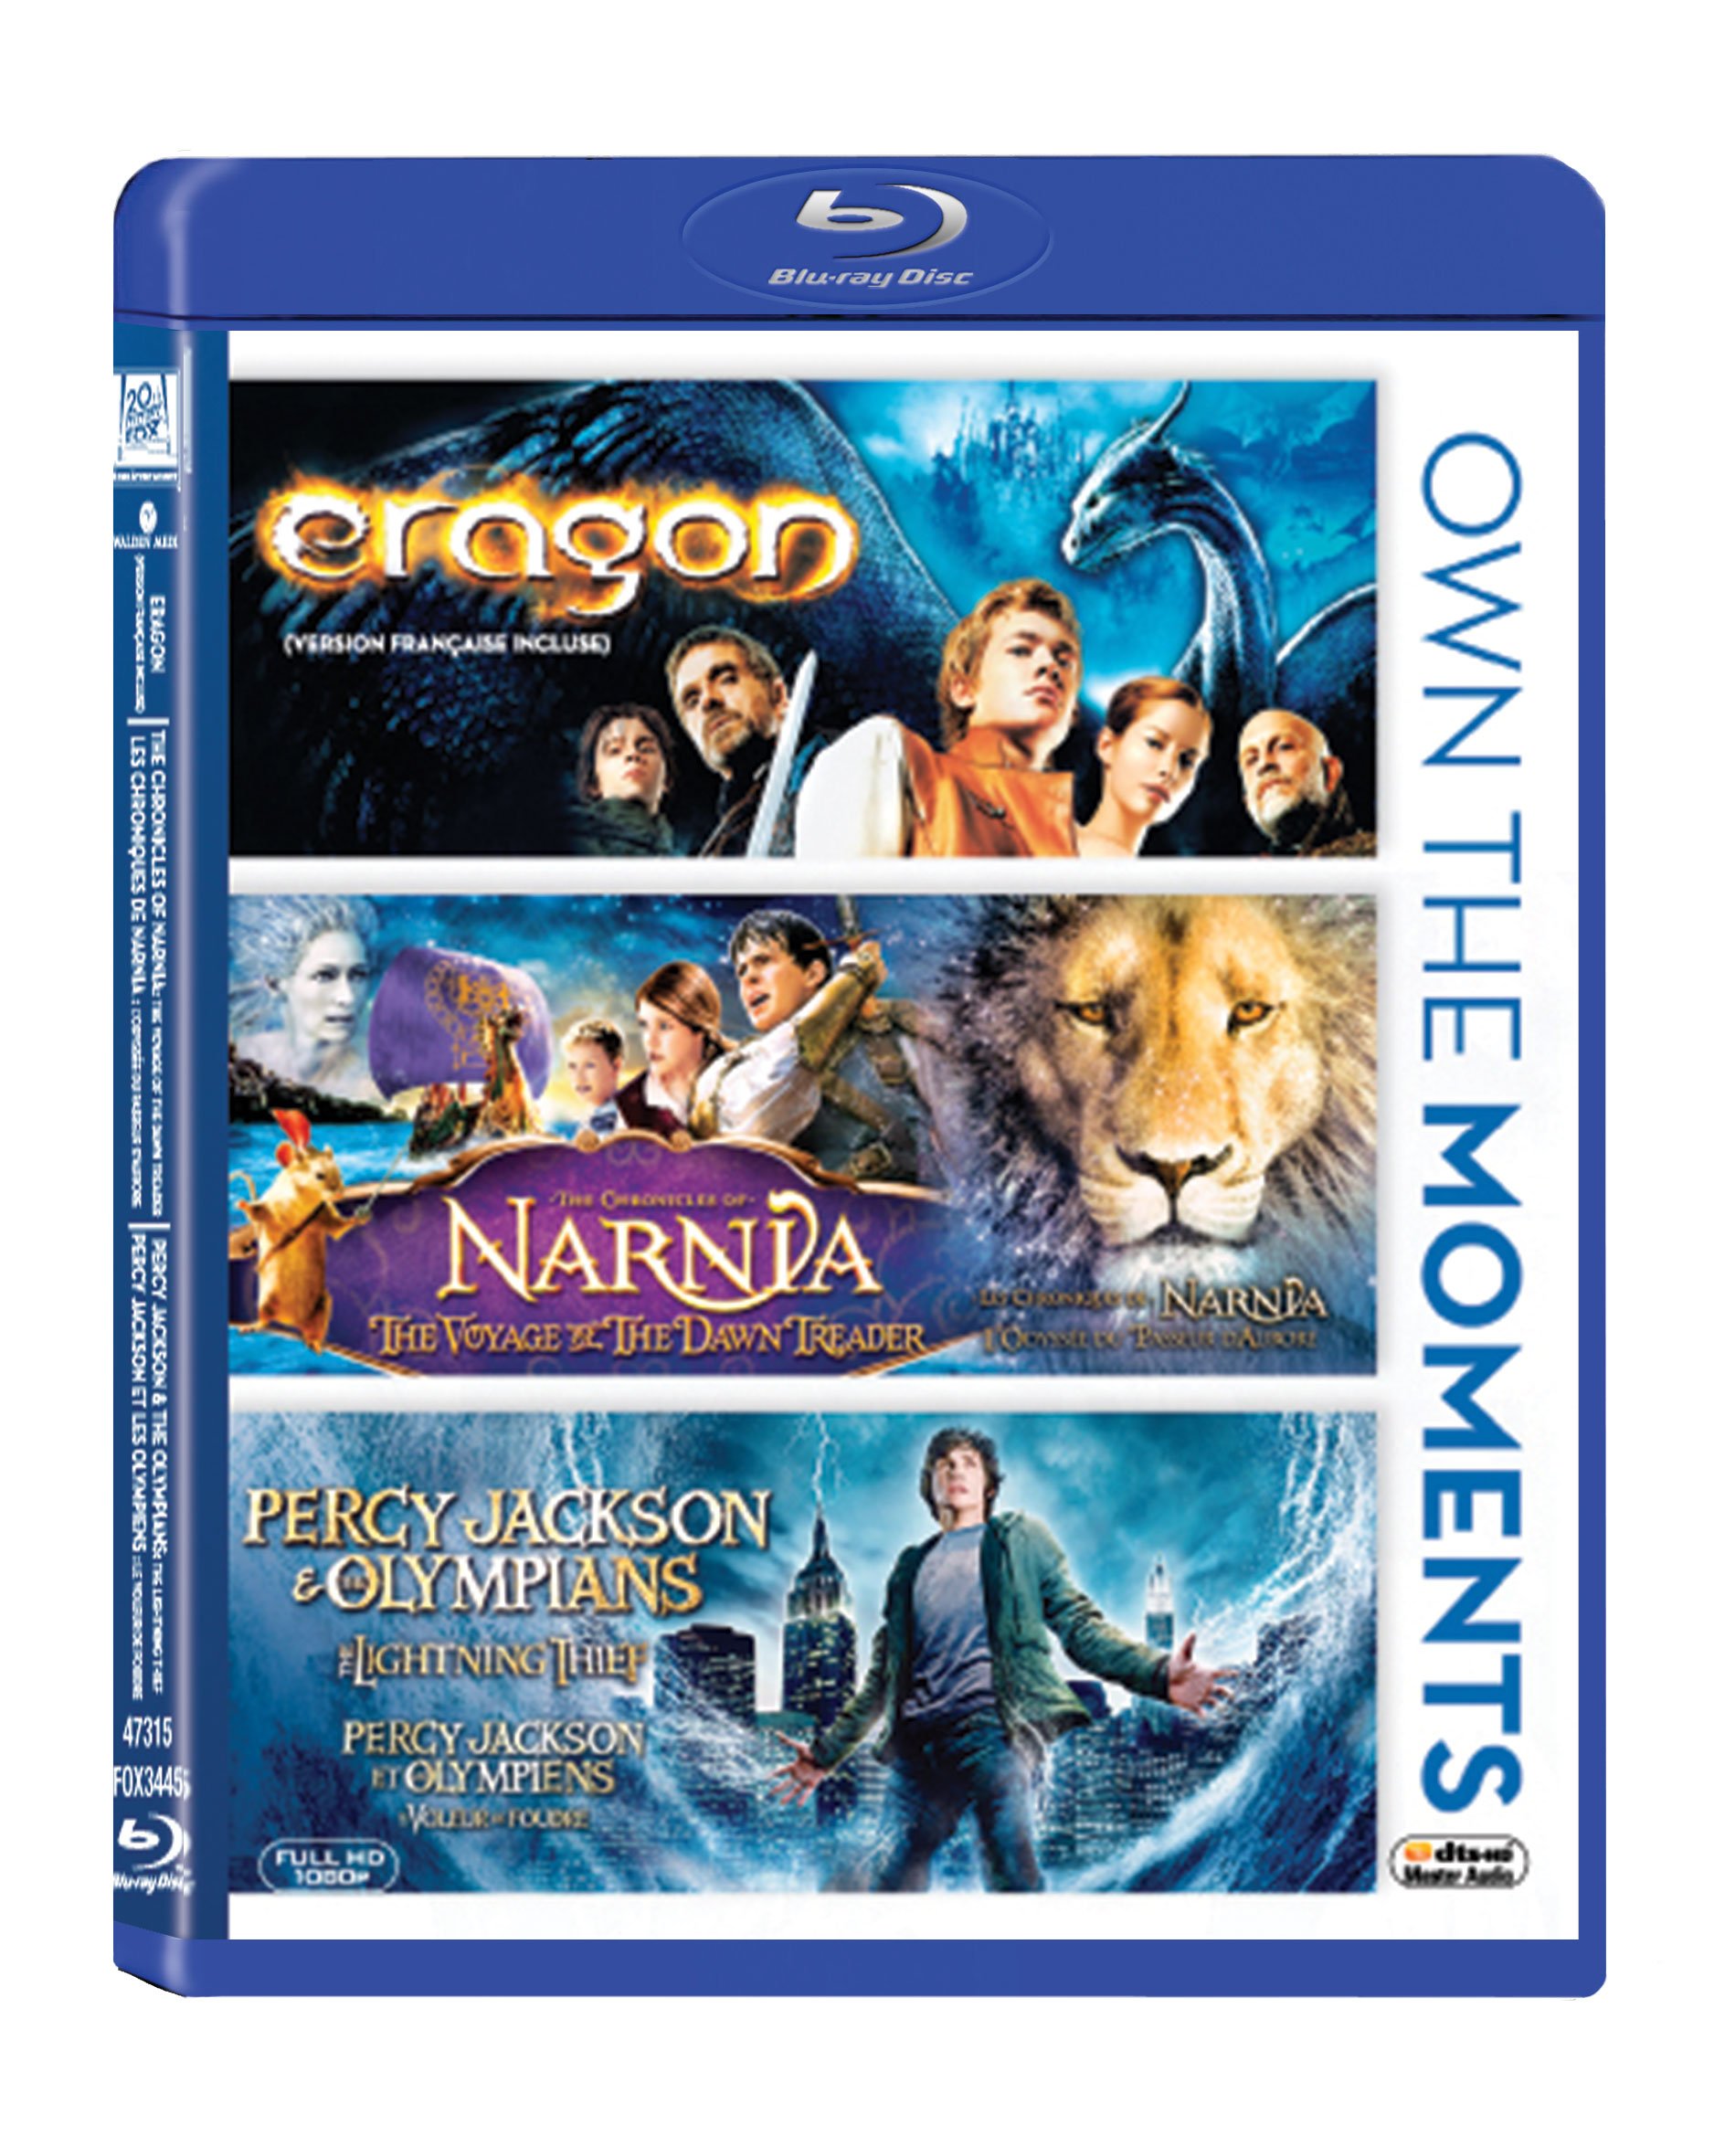 own-the-moments-3-movies-collection-eragon-narnia-the-voyage-of-the-dawn-treader-percy-jackson-the-olympians-the-lightning-thief-3-disc-box-set